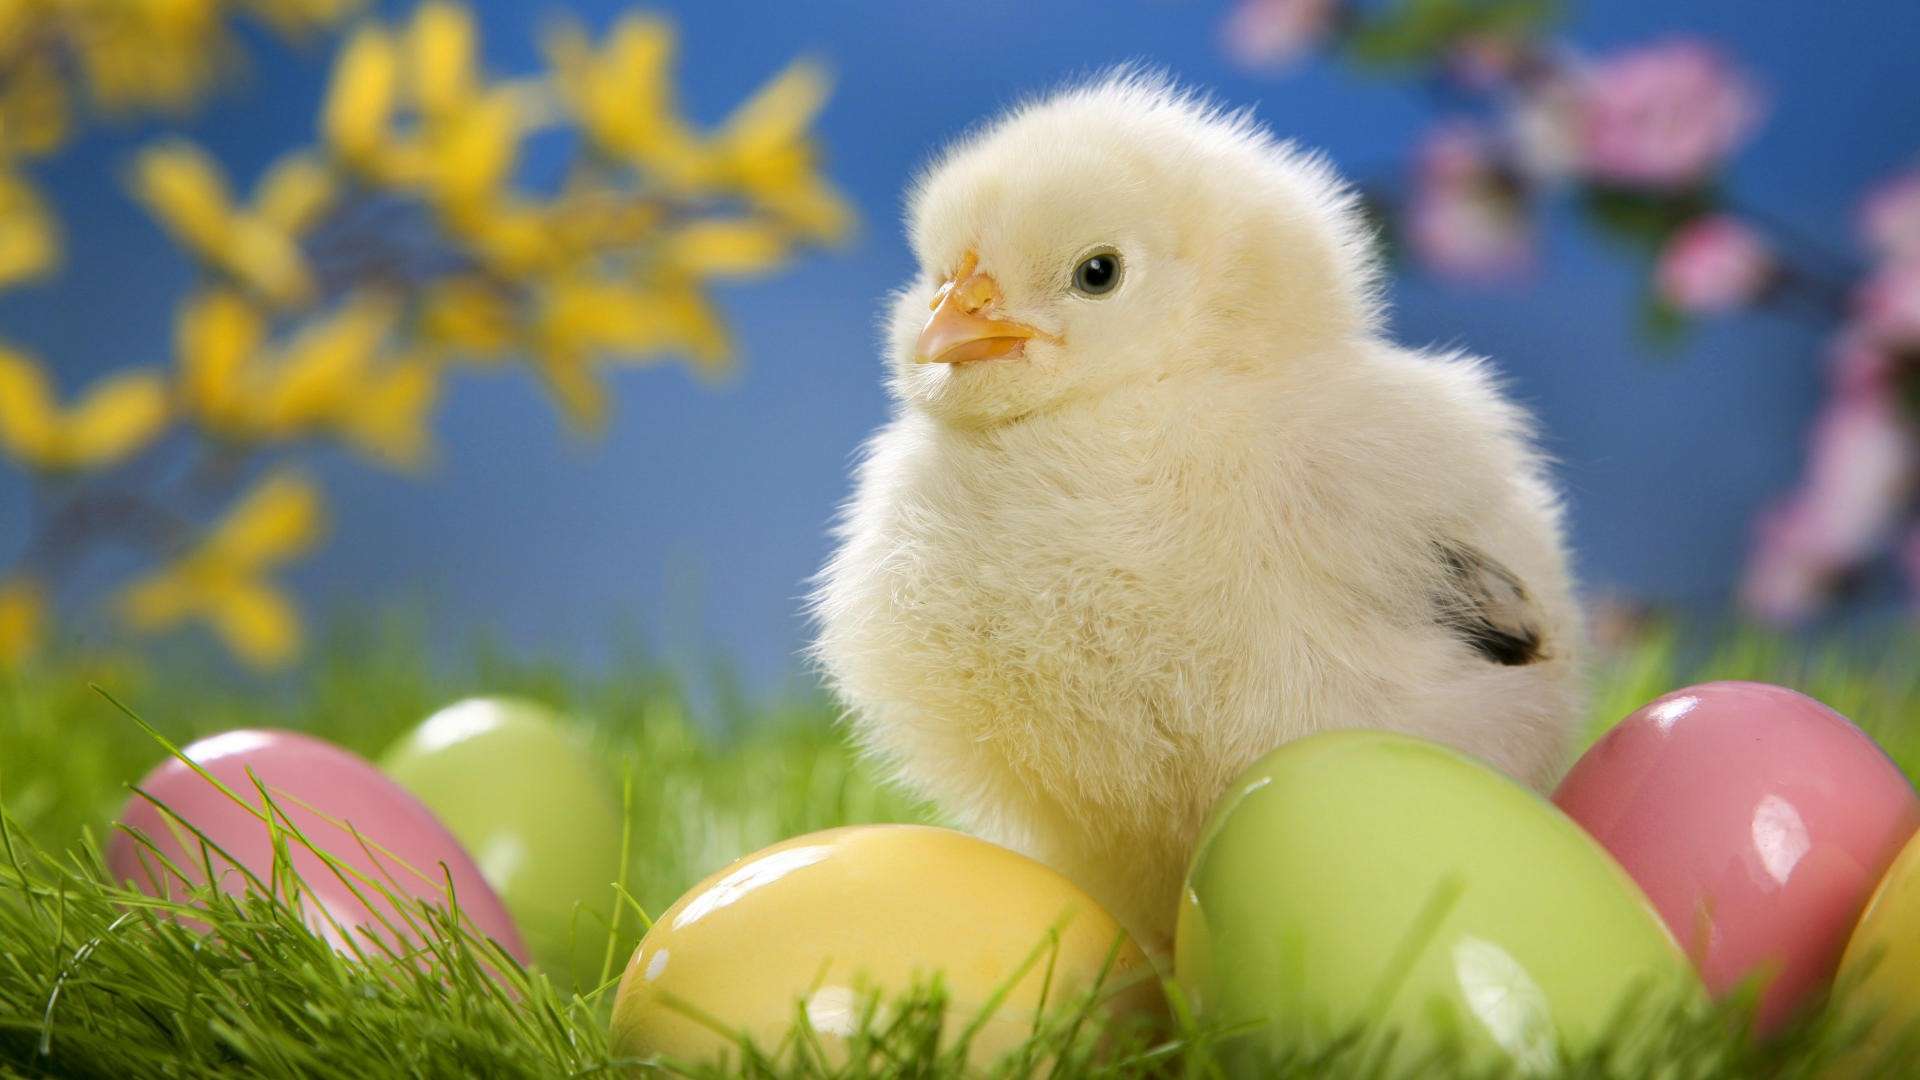 Cute Easter Chick with Eggs HD Wallpaper FullHDWpp HD